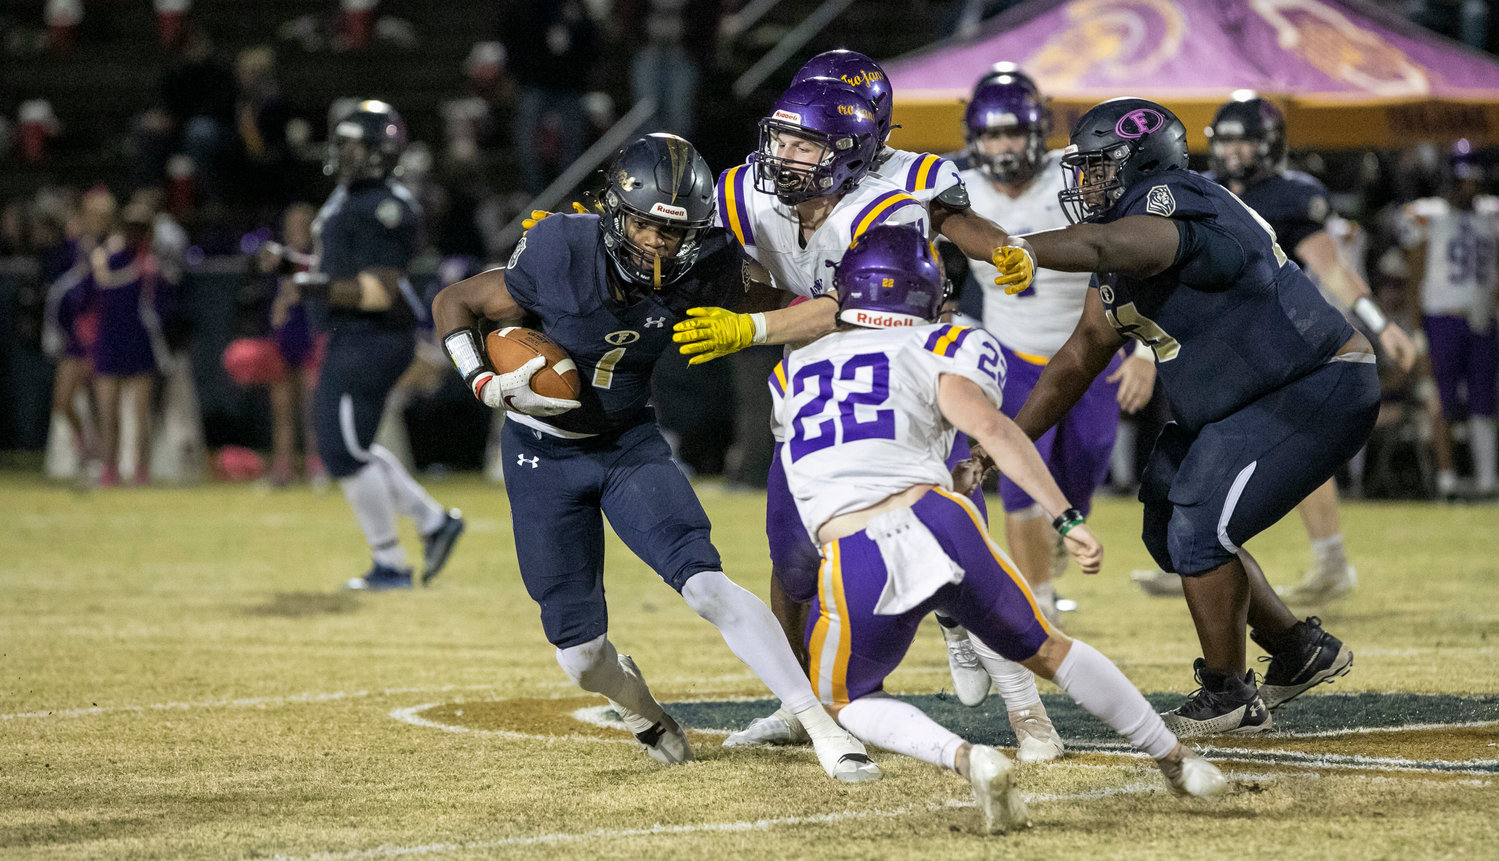 Foley junior Perry Thompson looks for yards after the catch during the Lions’ Class 7A Region 1 title game against the Daphne Trojans on Smith-Pigott Field at Ivan Jones Stadium Friday night. Foley won 34-7 to claim its first region crown since 2007.